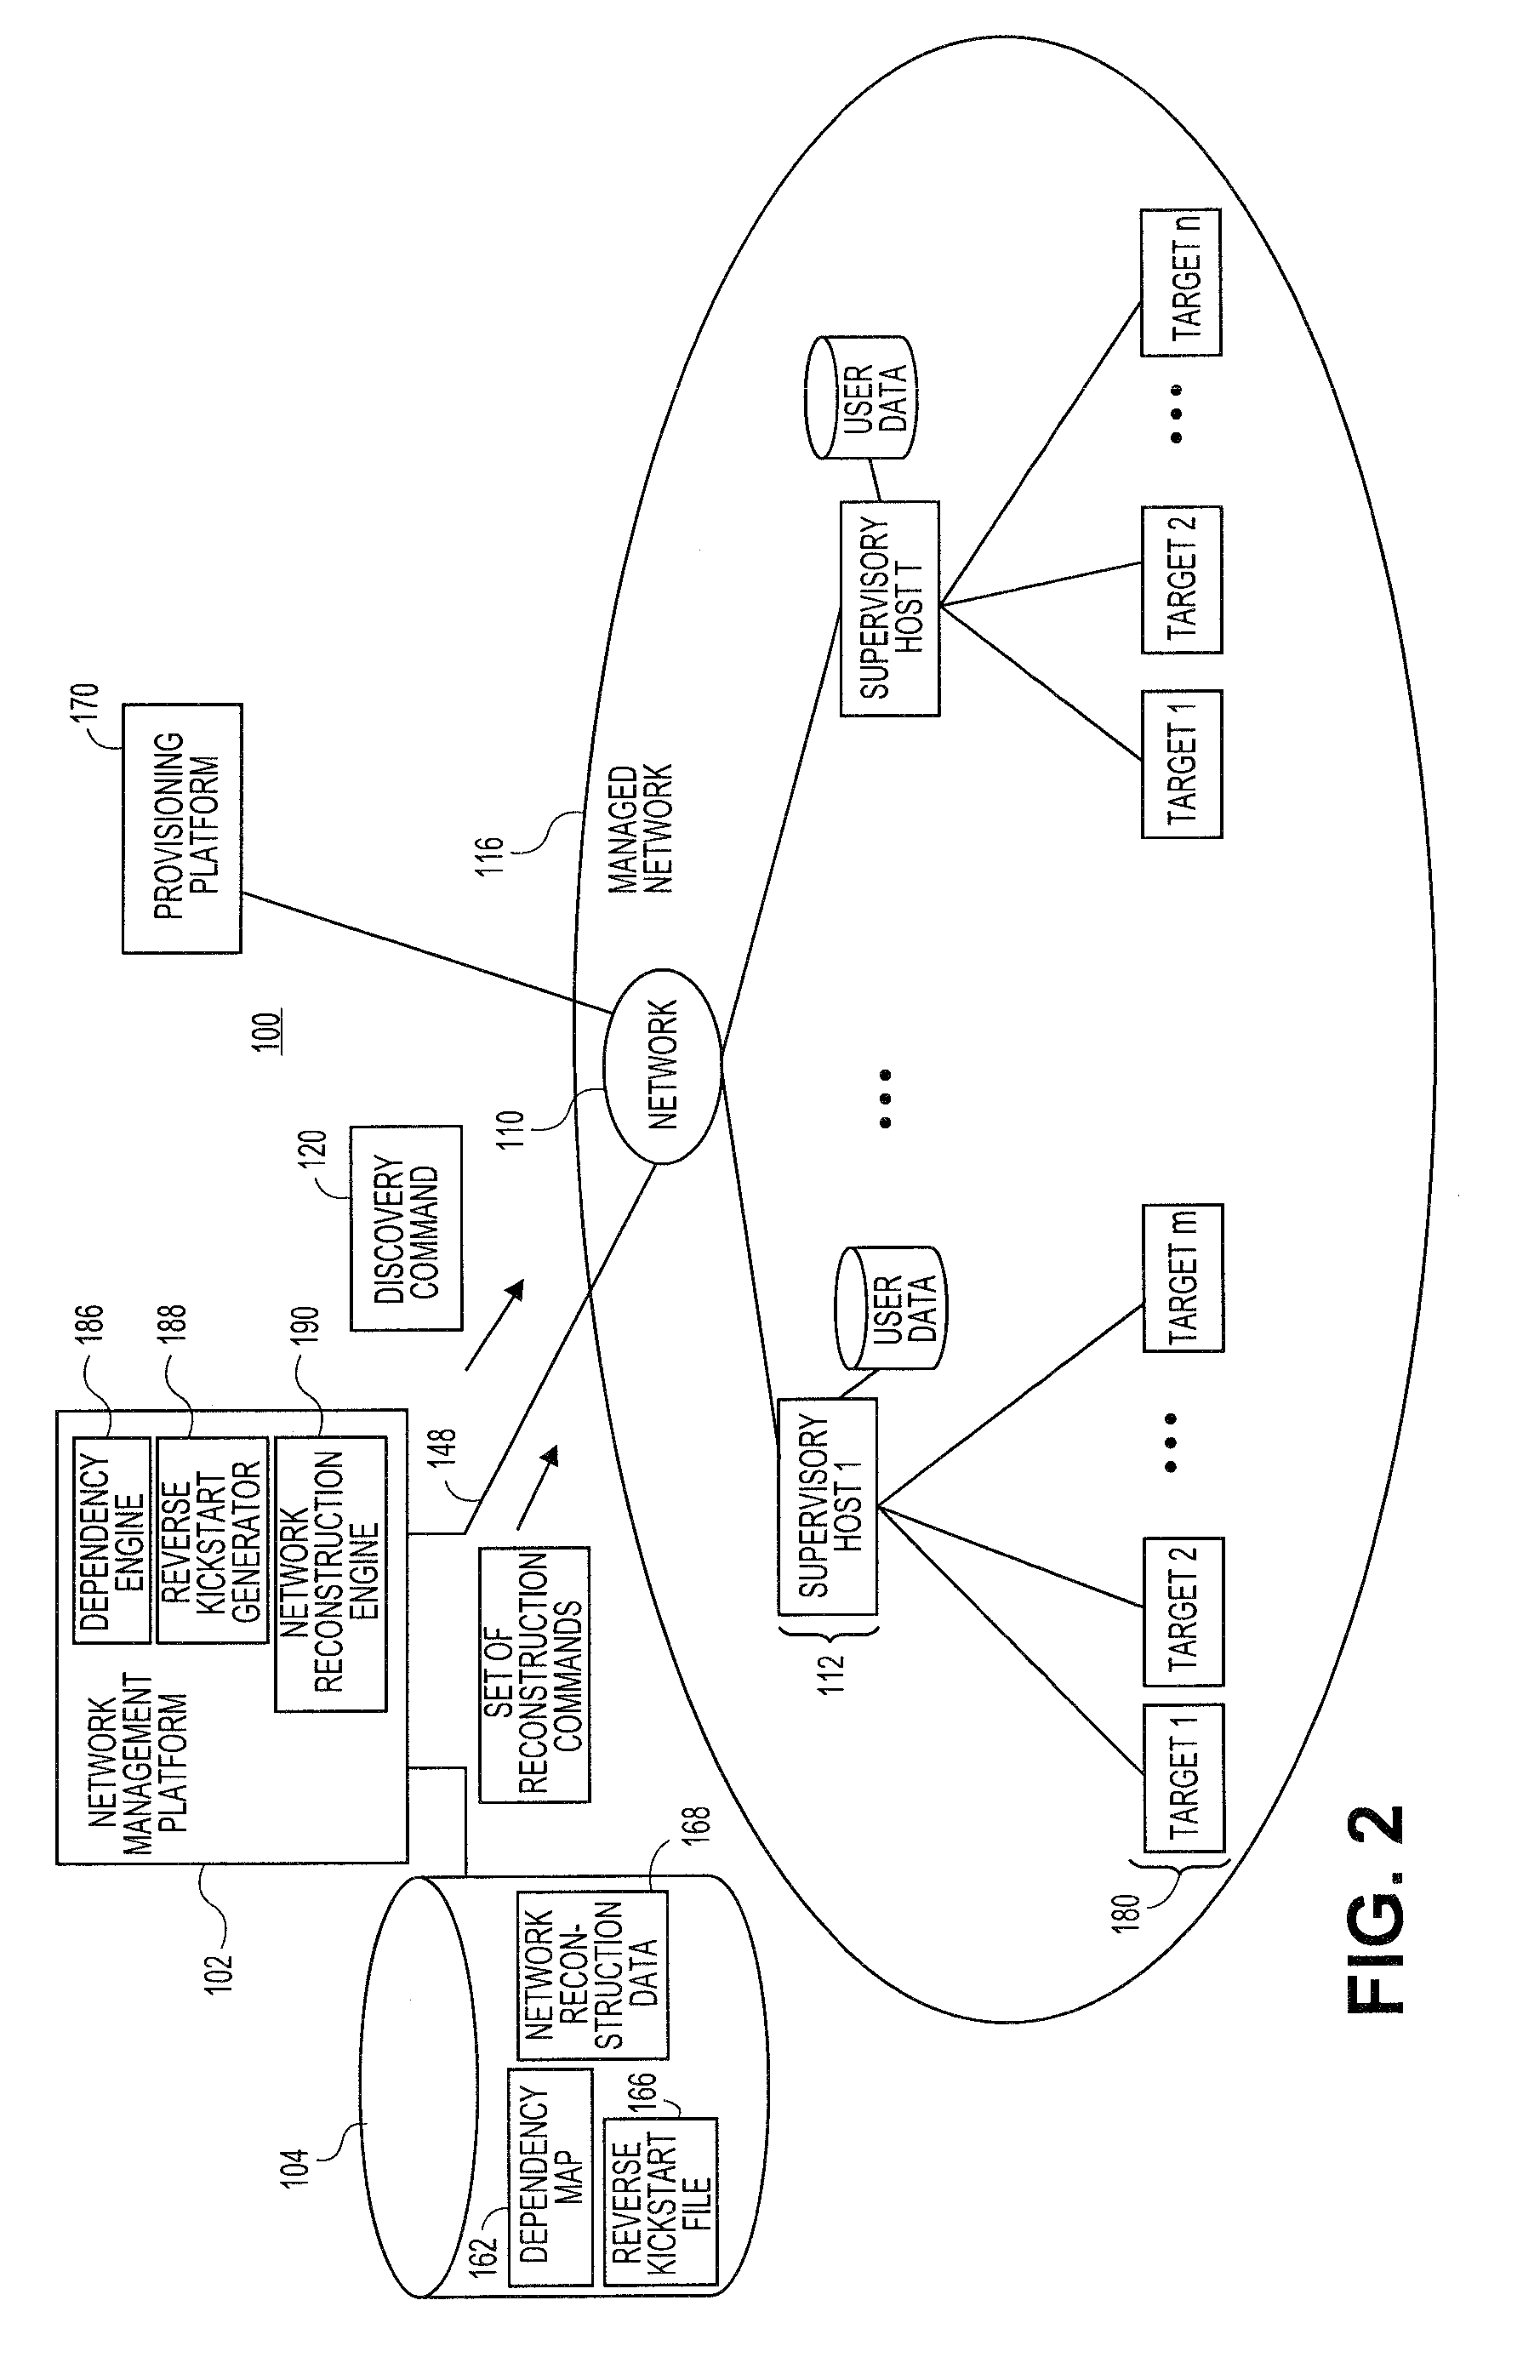 Systems and methods for automatic discovery of network software relationships